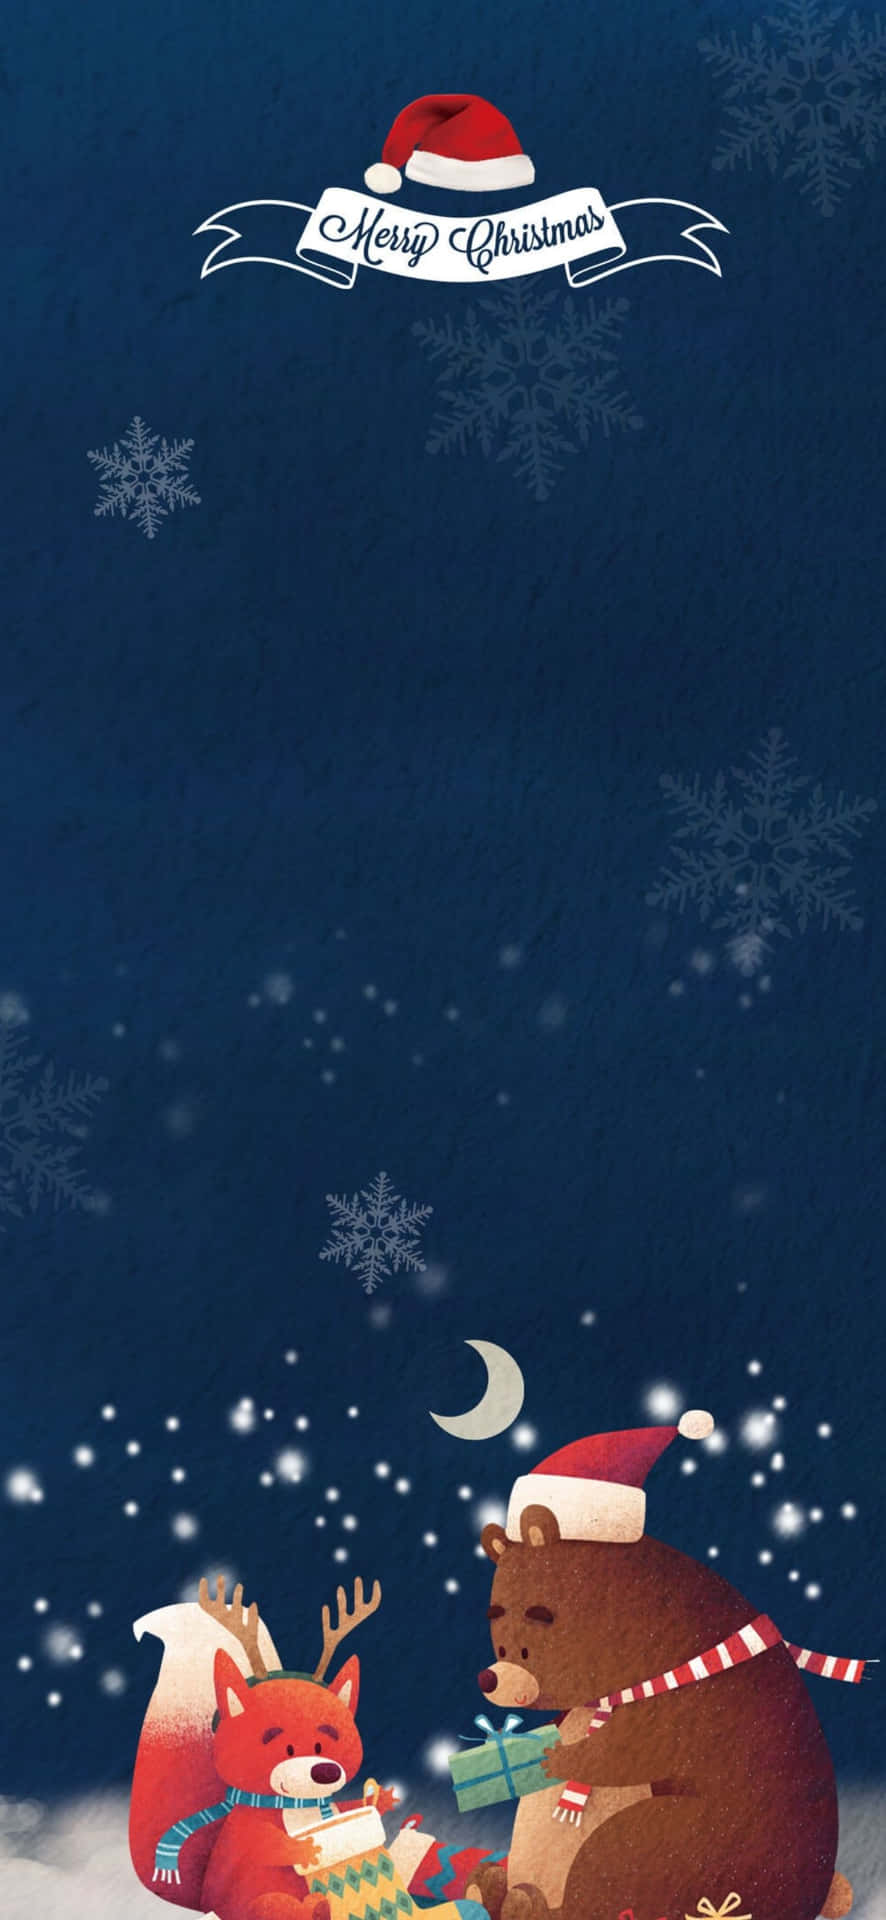 It's Christmas time! Celebrate with this festive iPhone background.